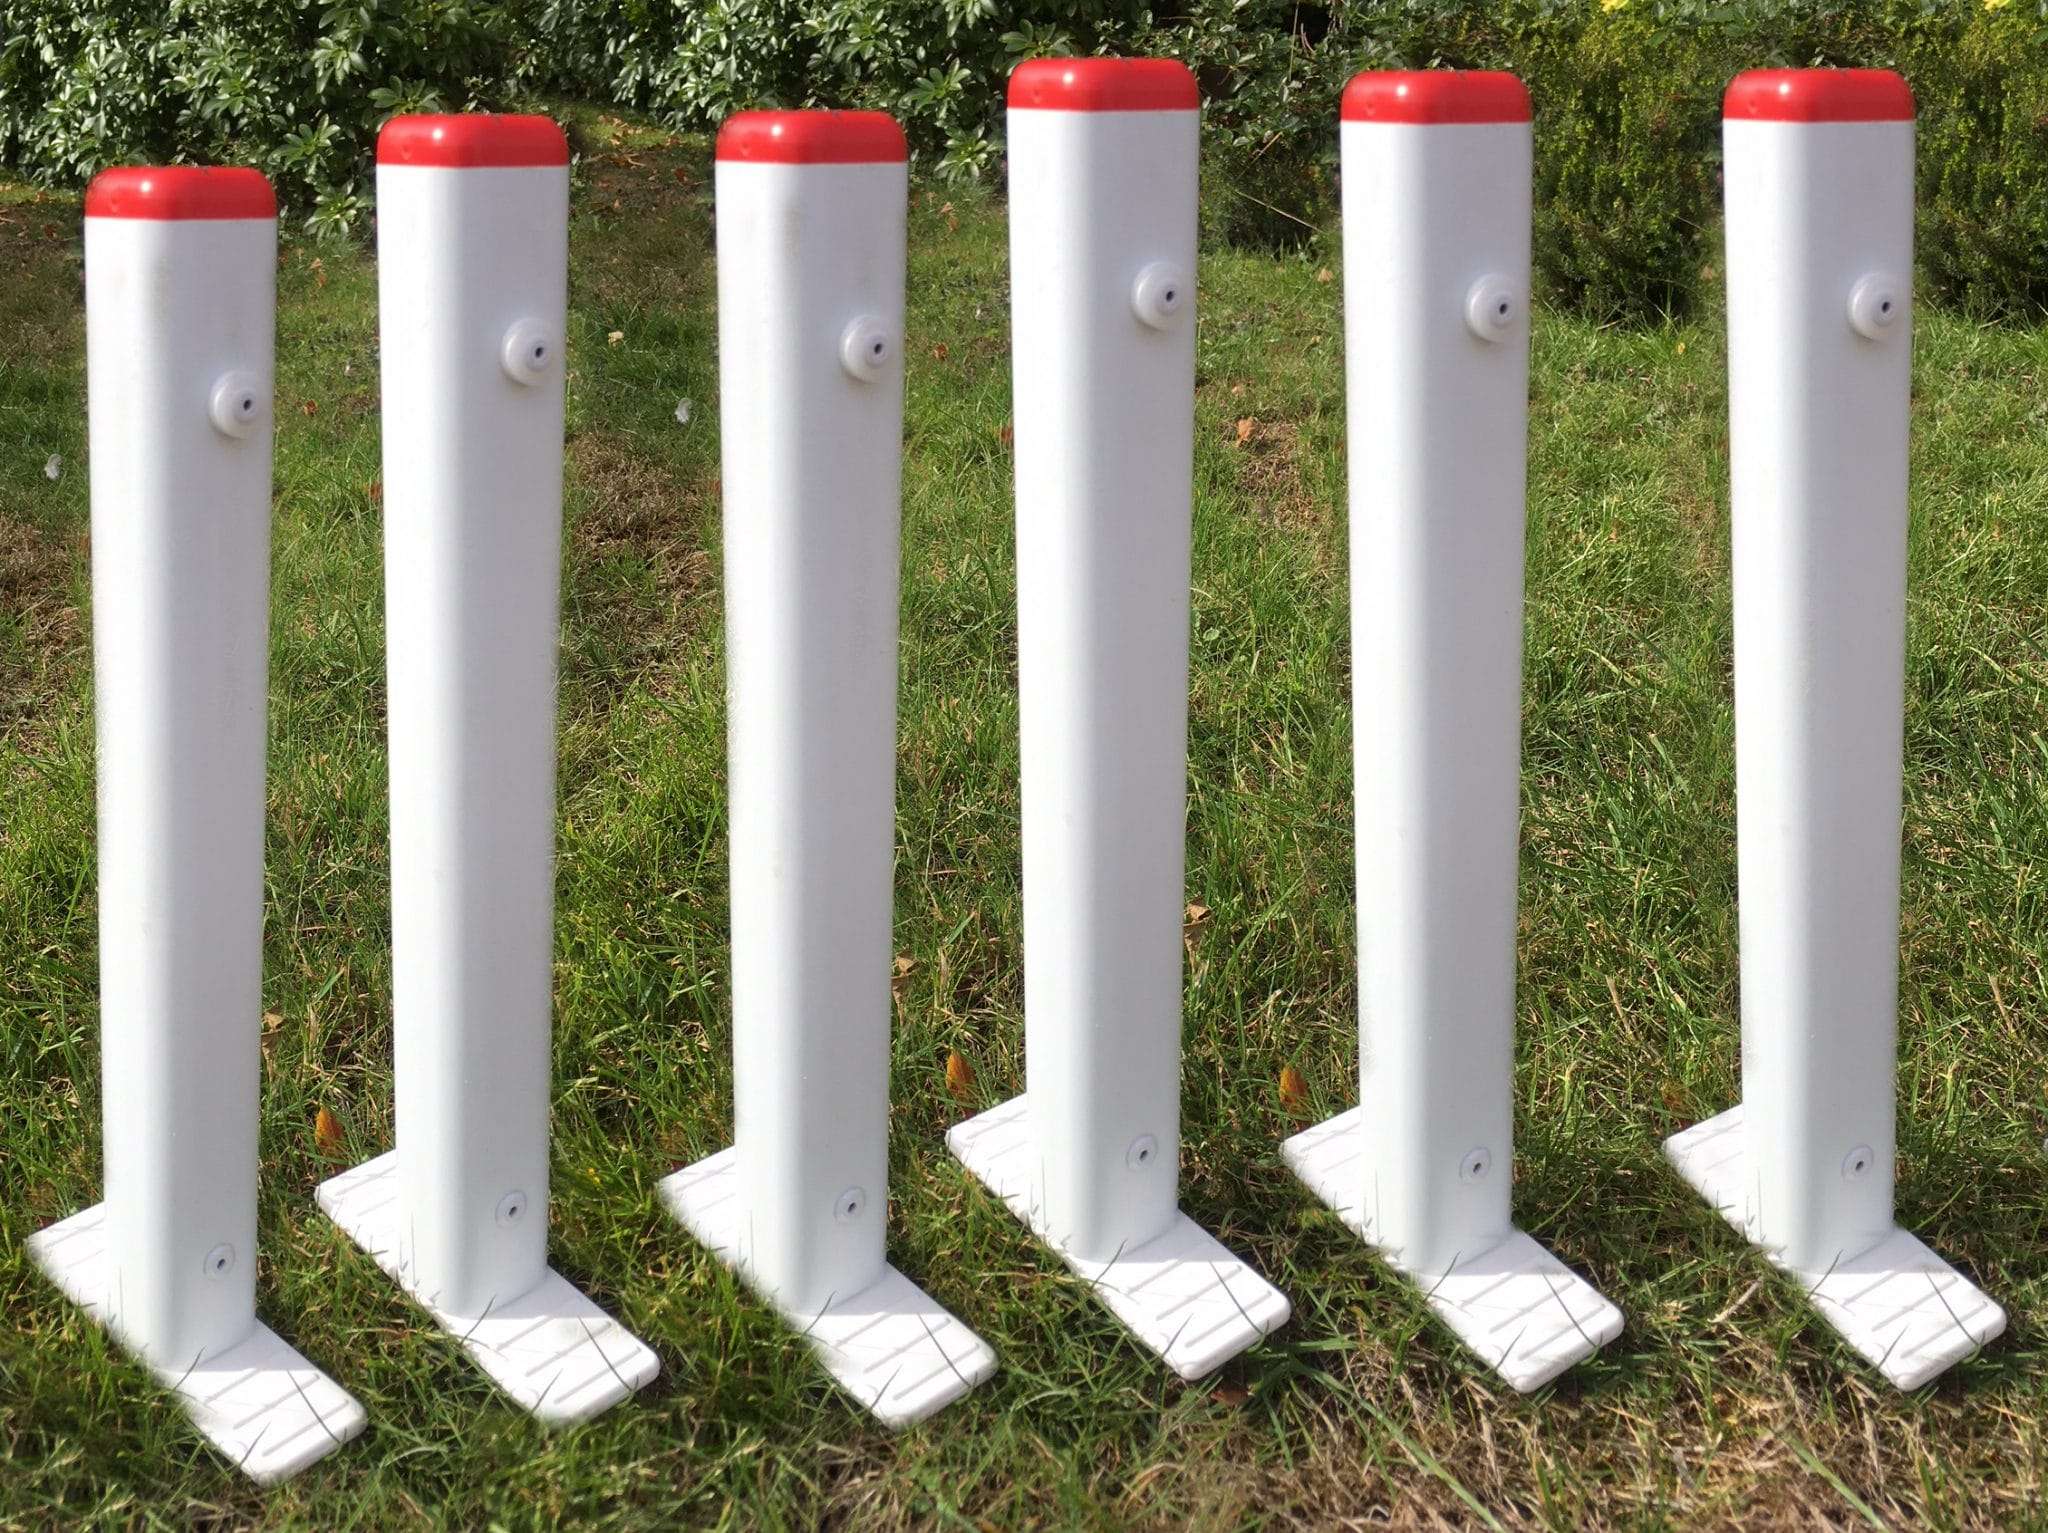 VERGE MARKERS SET OF 6